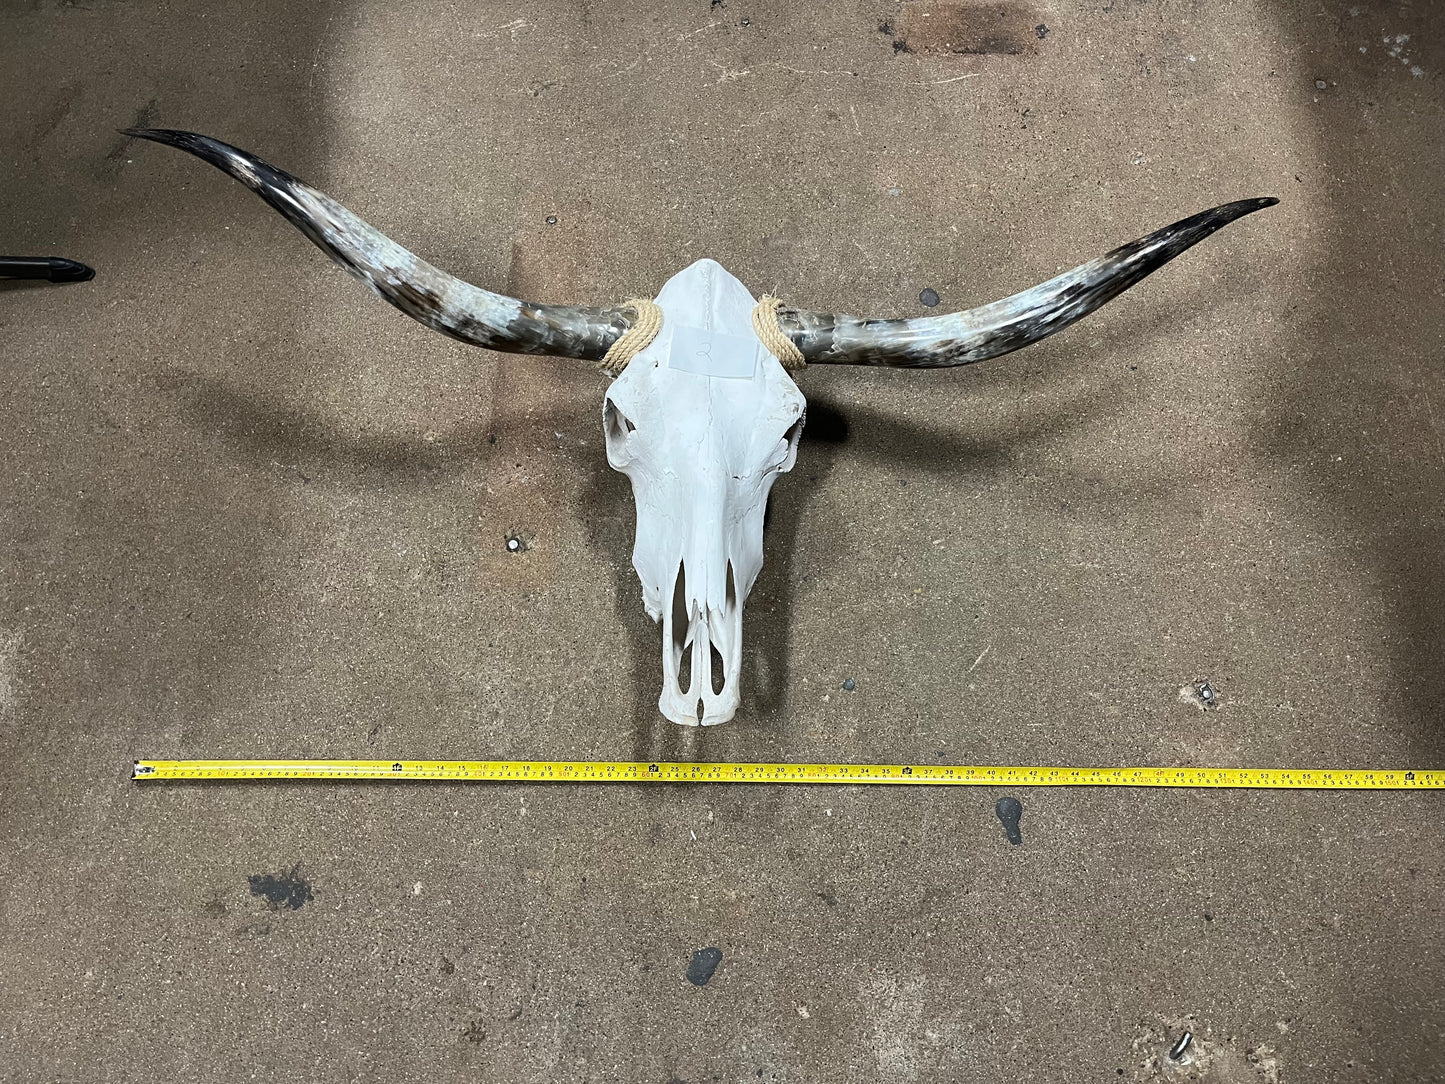 Cow Skulls With Polished Horns